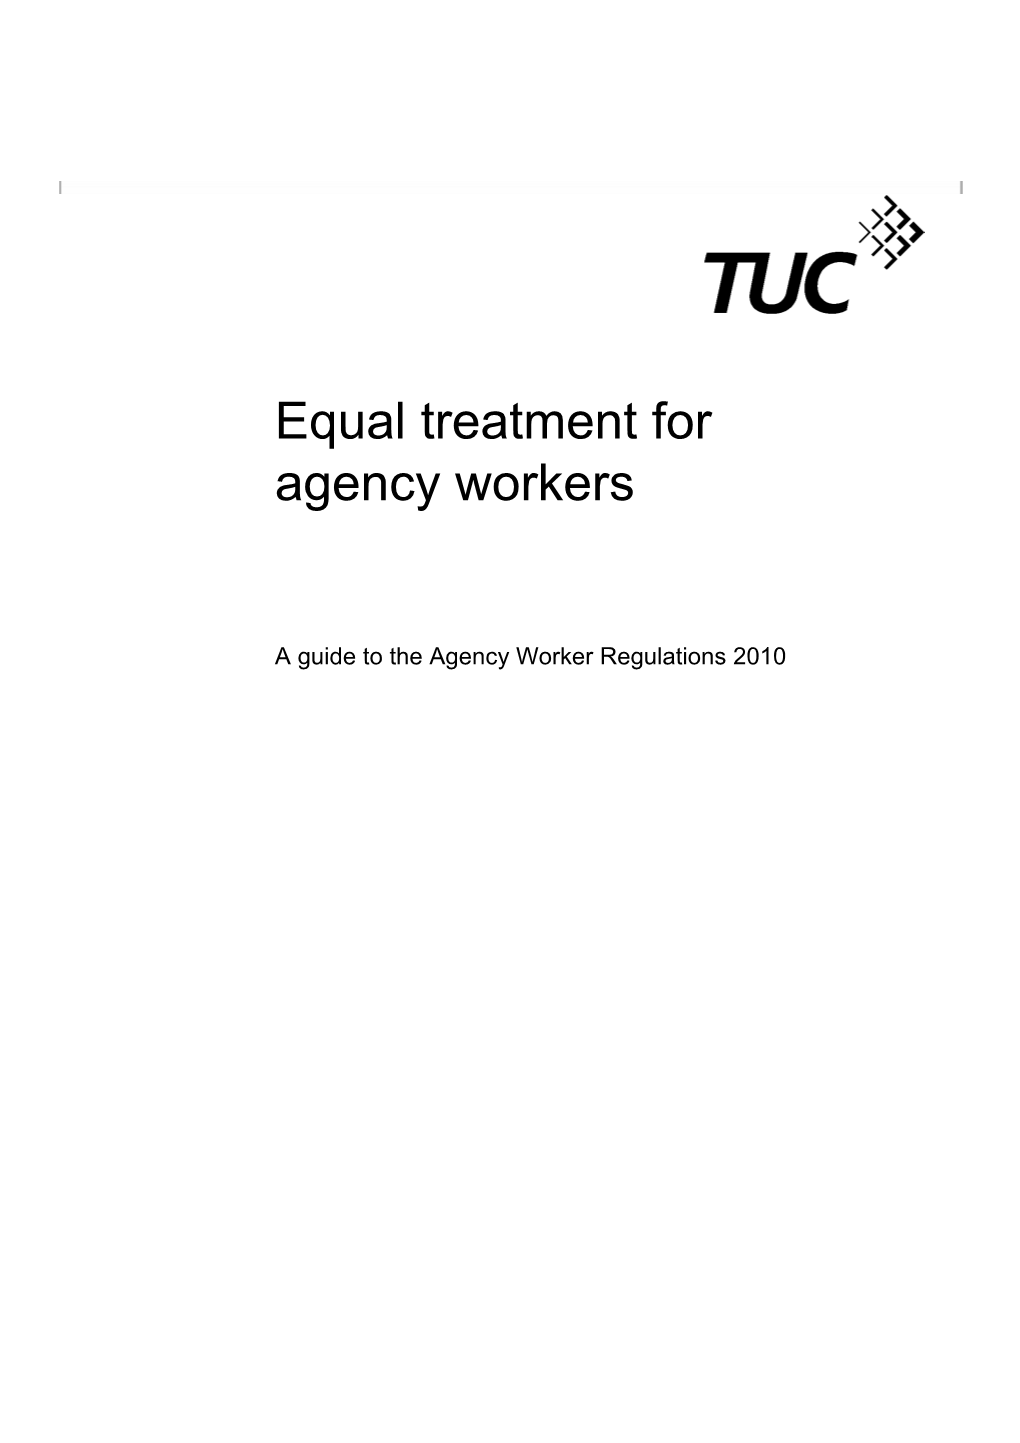 Equal Treatment for Agency Workers